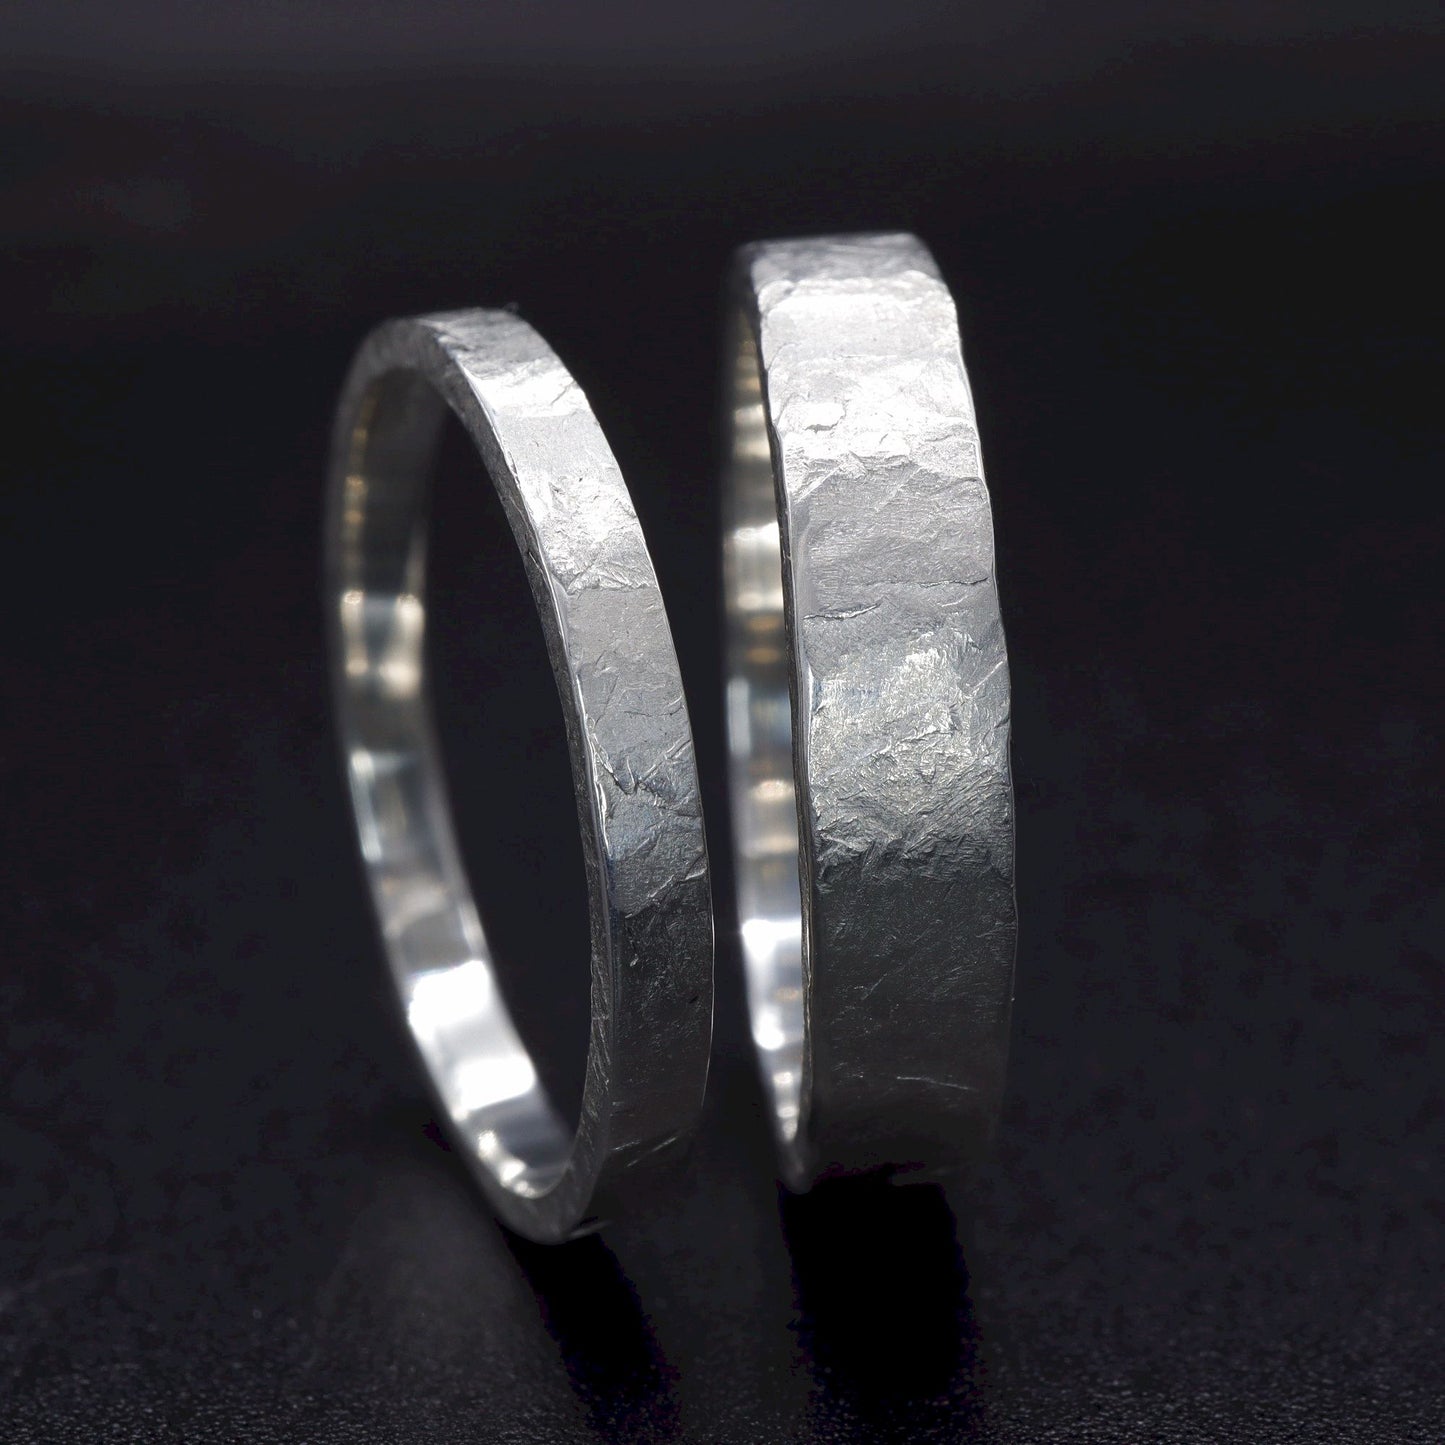 Windermere silver matching wedding ring set - rustic flat hammered textured band - original men`s and women`s design - 2mm and 4mm.